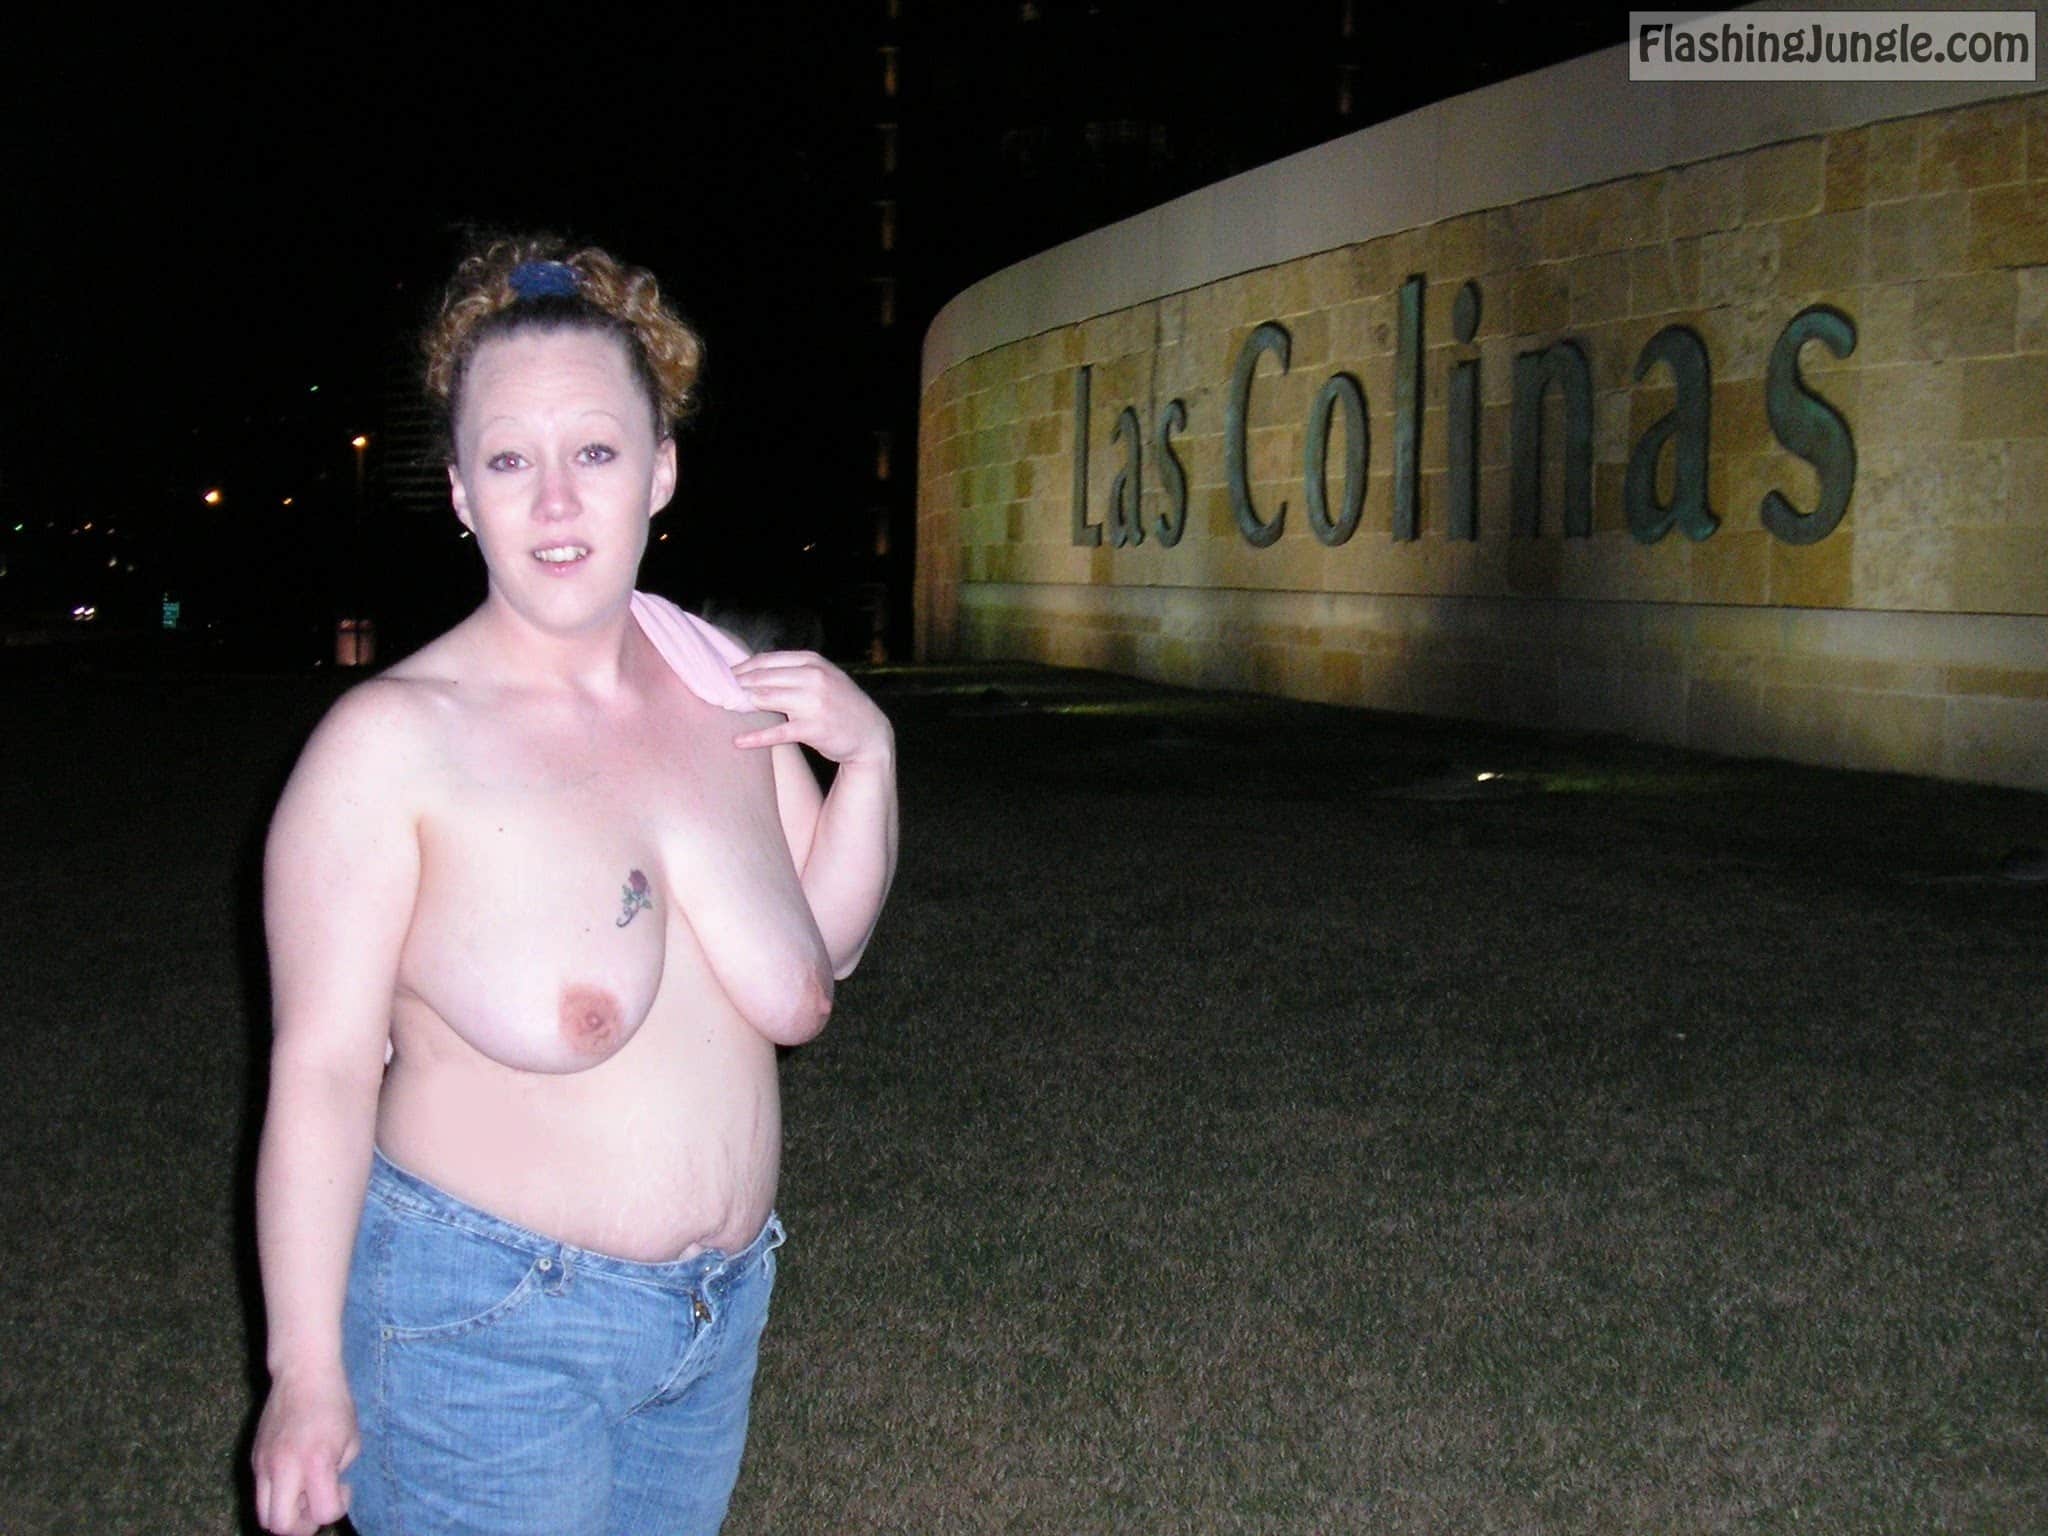 jb webcam topless зшсы - Topless Flashing by highway Las Colinas Flashing by highway in Irving Tx. Topless wife is flashing big tits in public. - Boobs Flash Pics